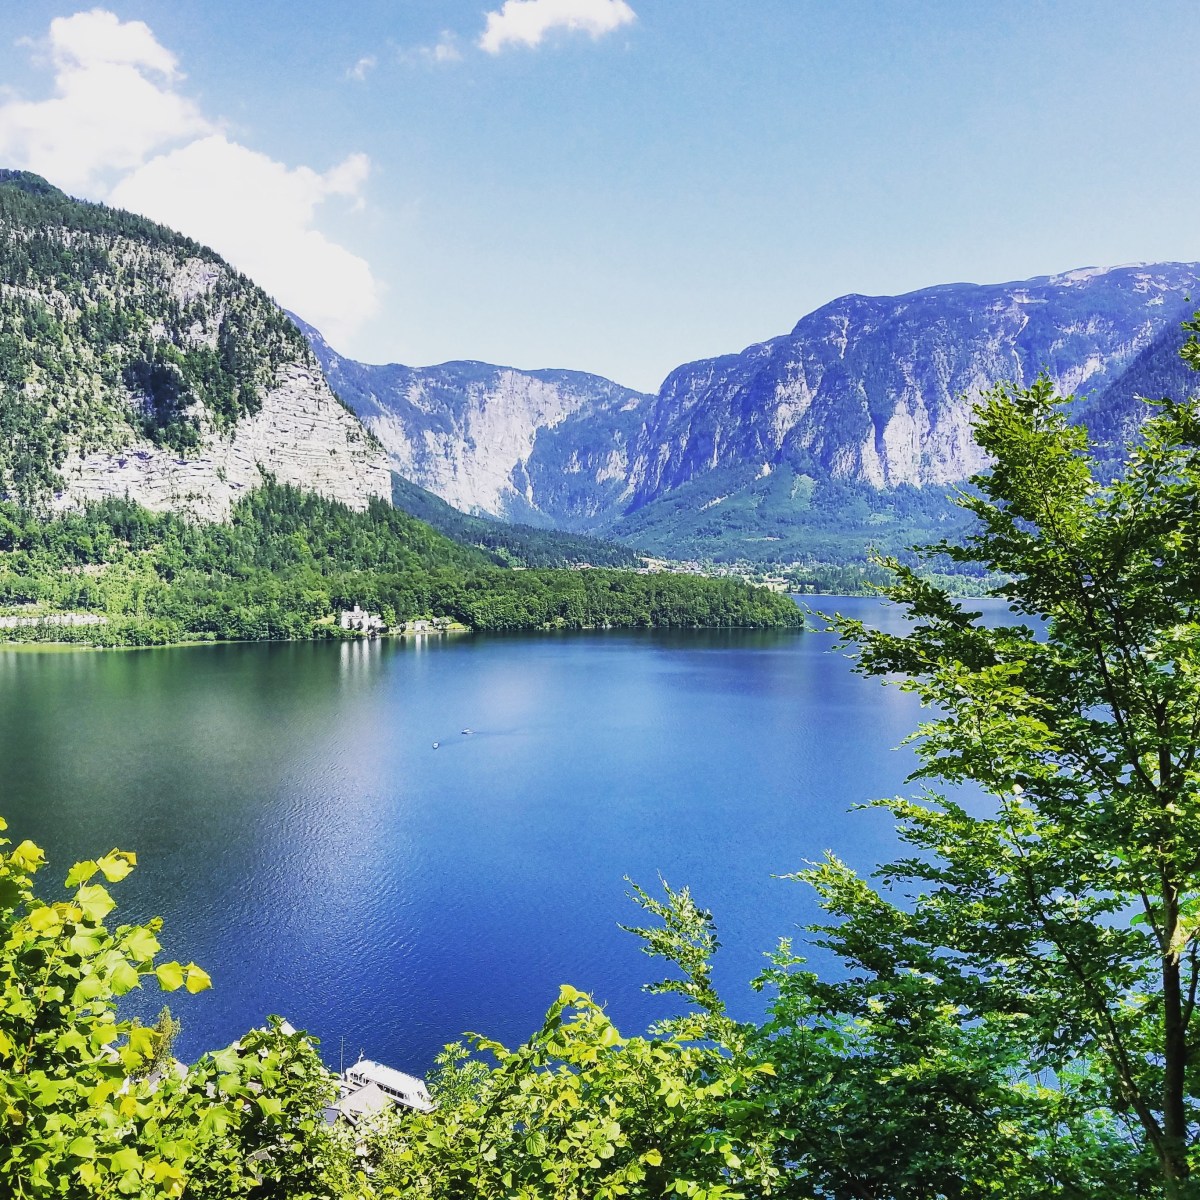 One Day in Hallstatt – A Complete Travel Guide